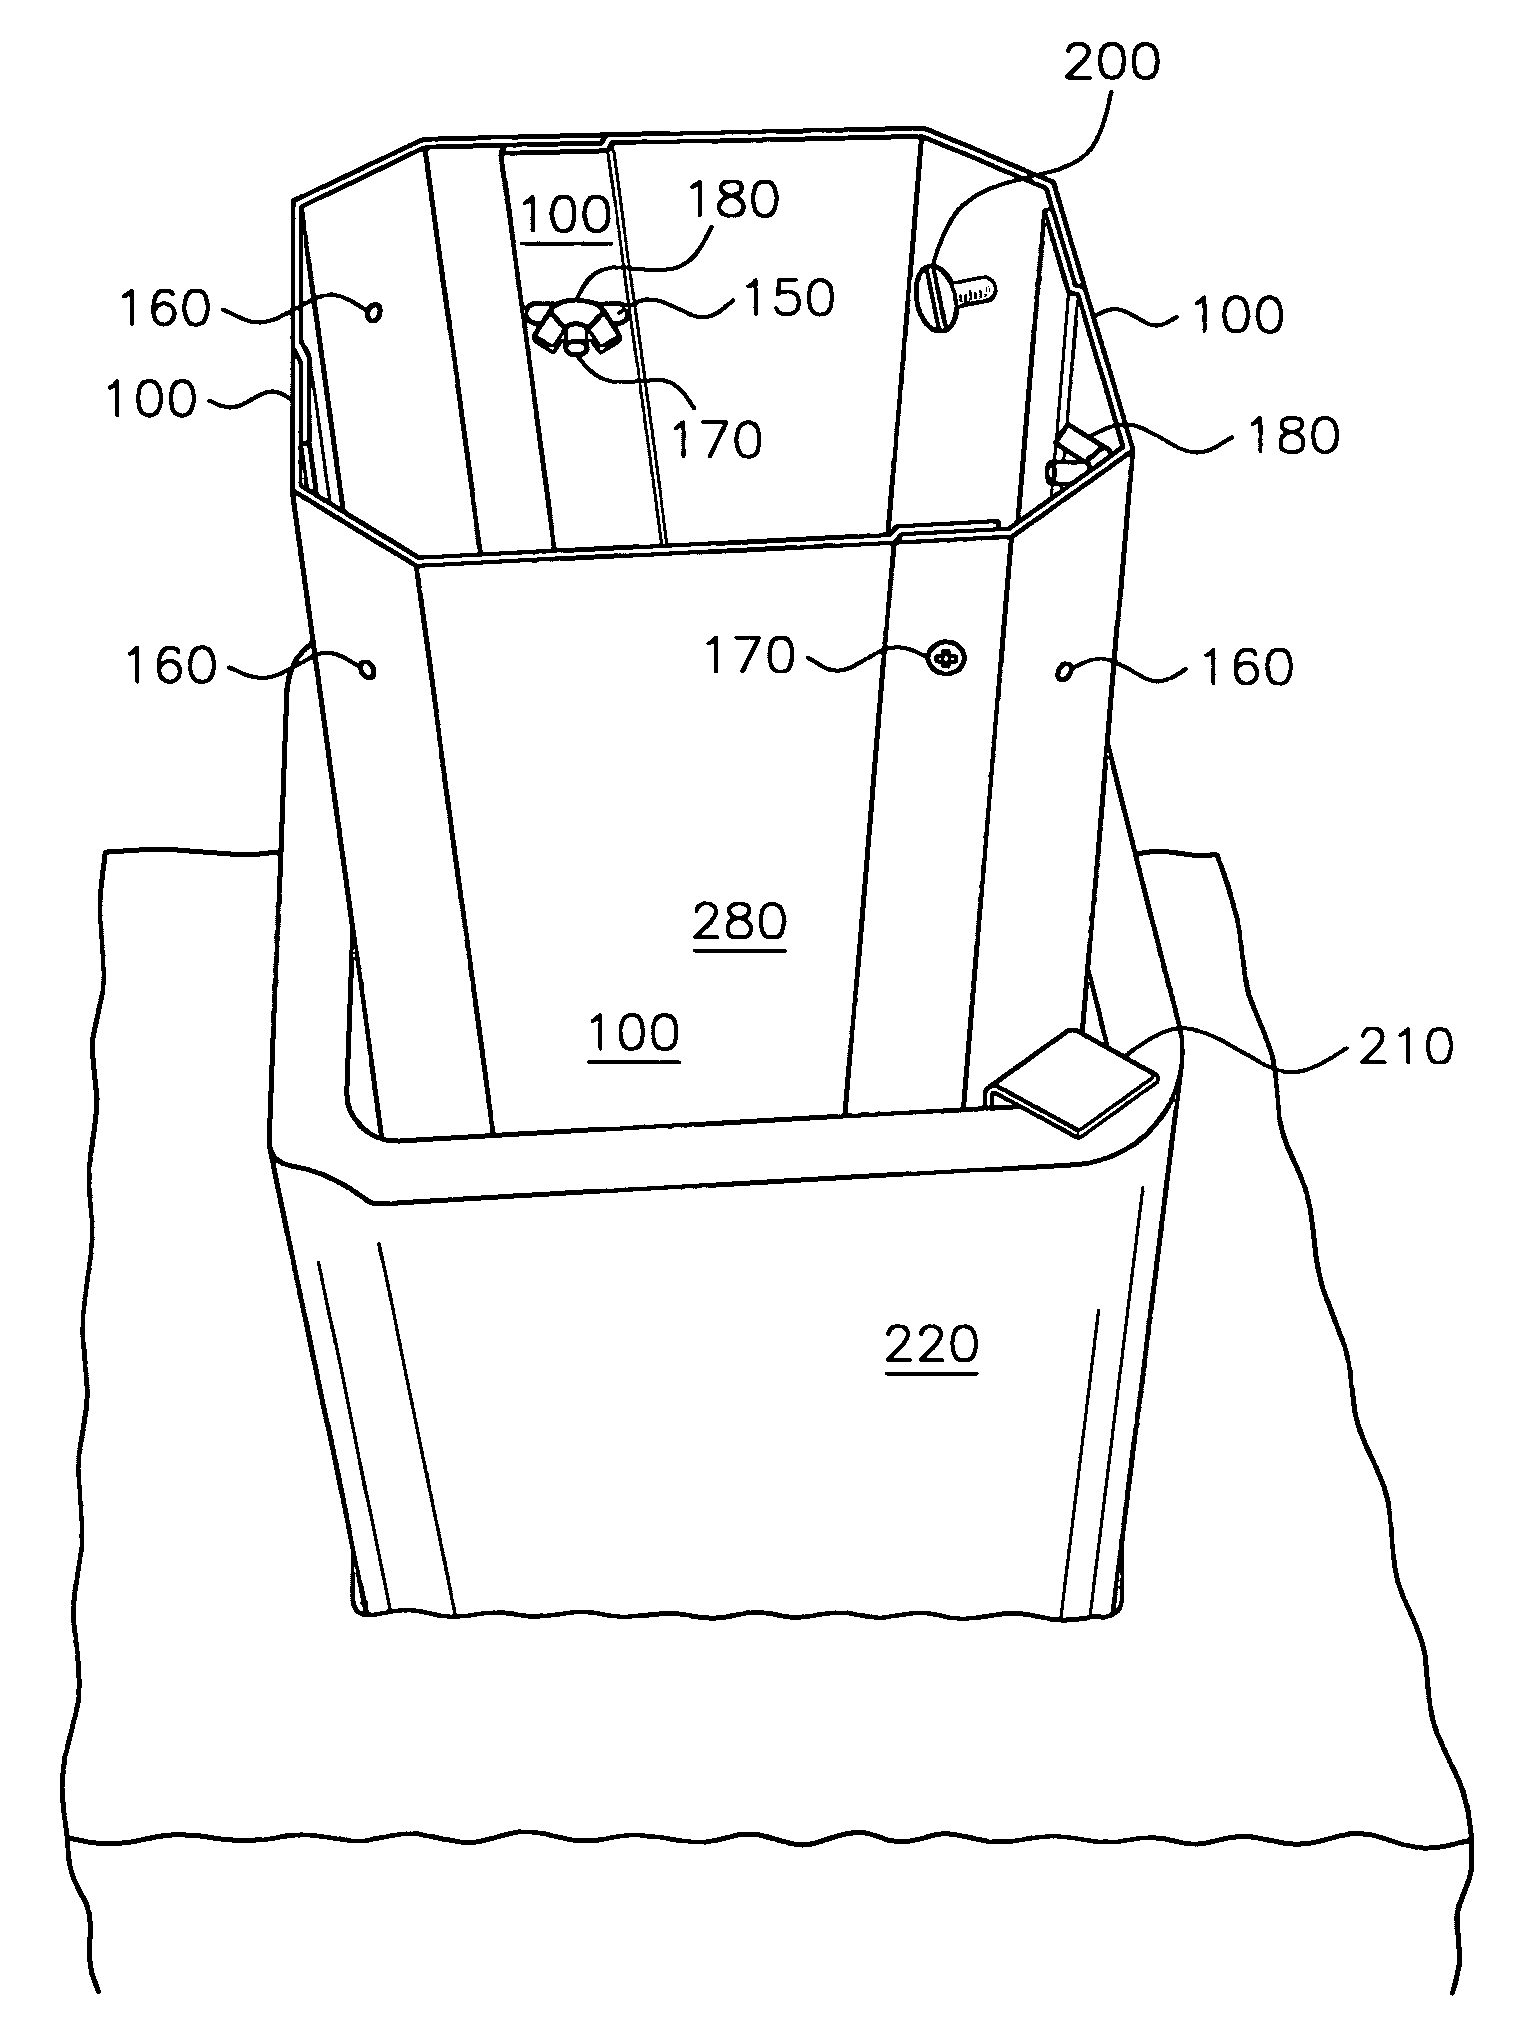 Method and apparatus for extending a chimney